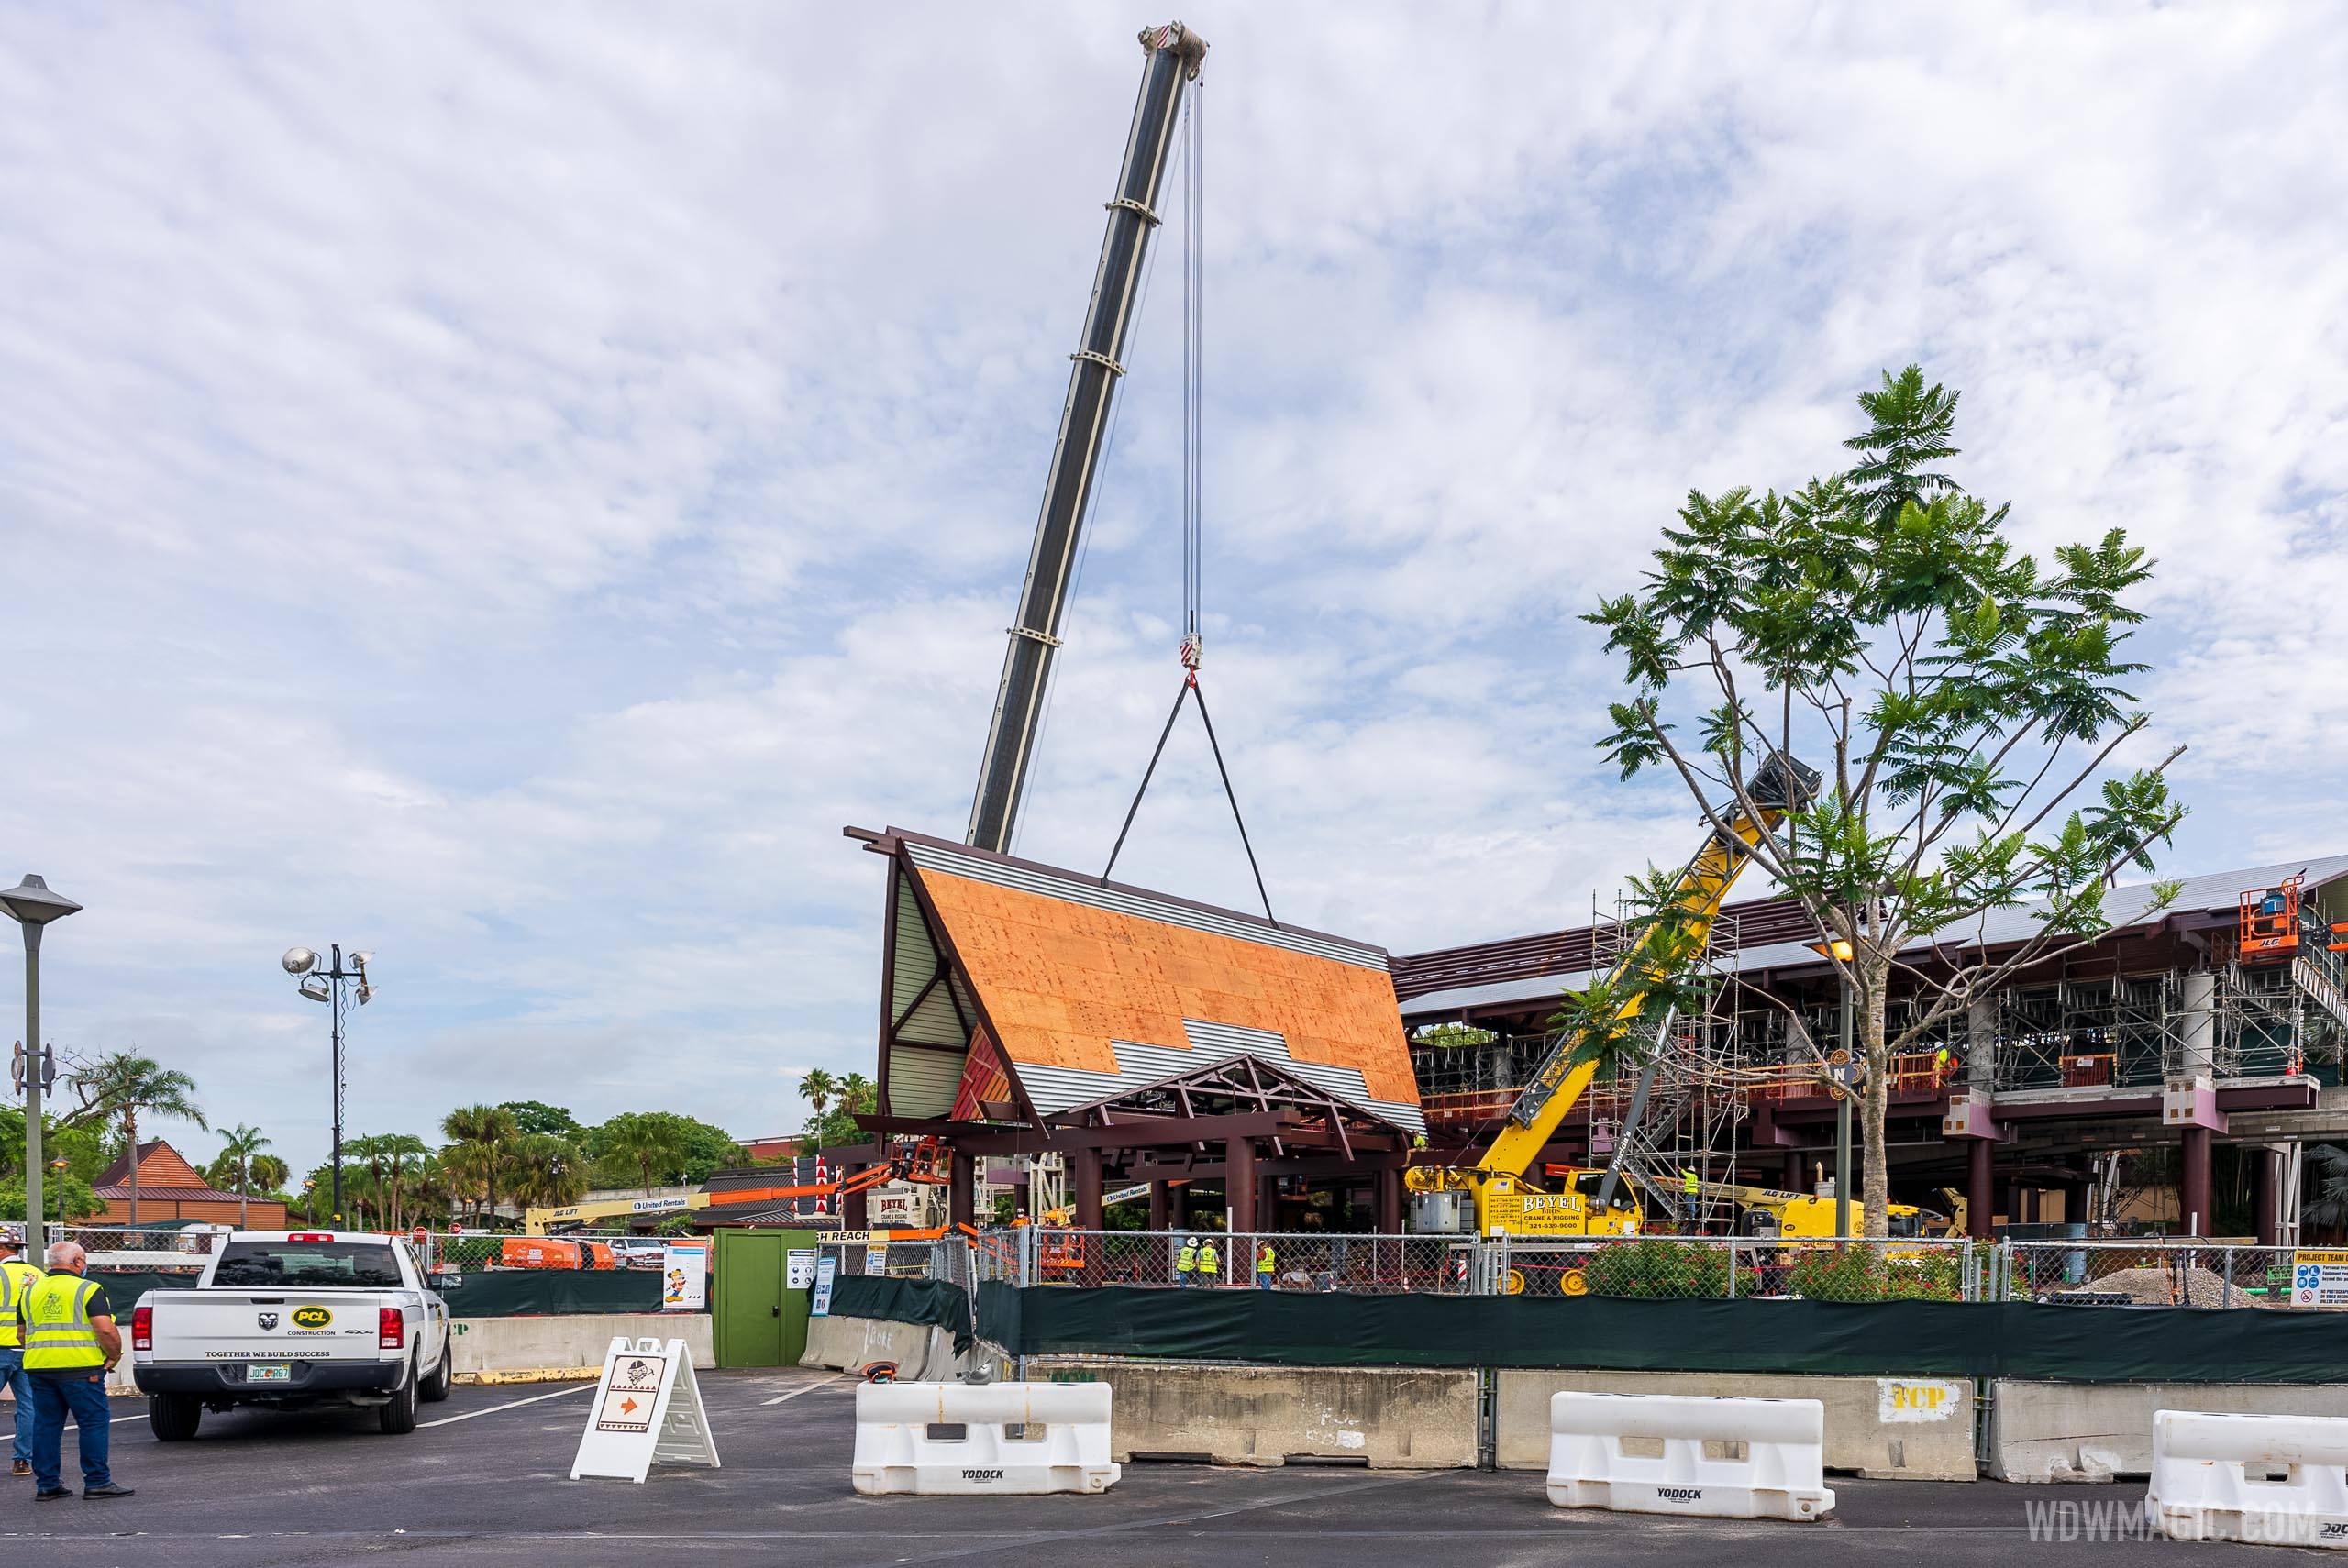 New Porte-cochere craned into position at the front of Disney's Polynesian Village Resort